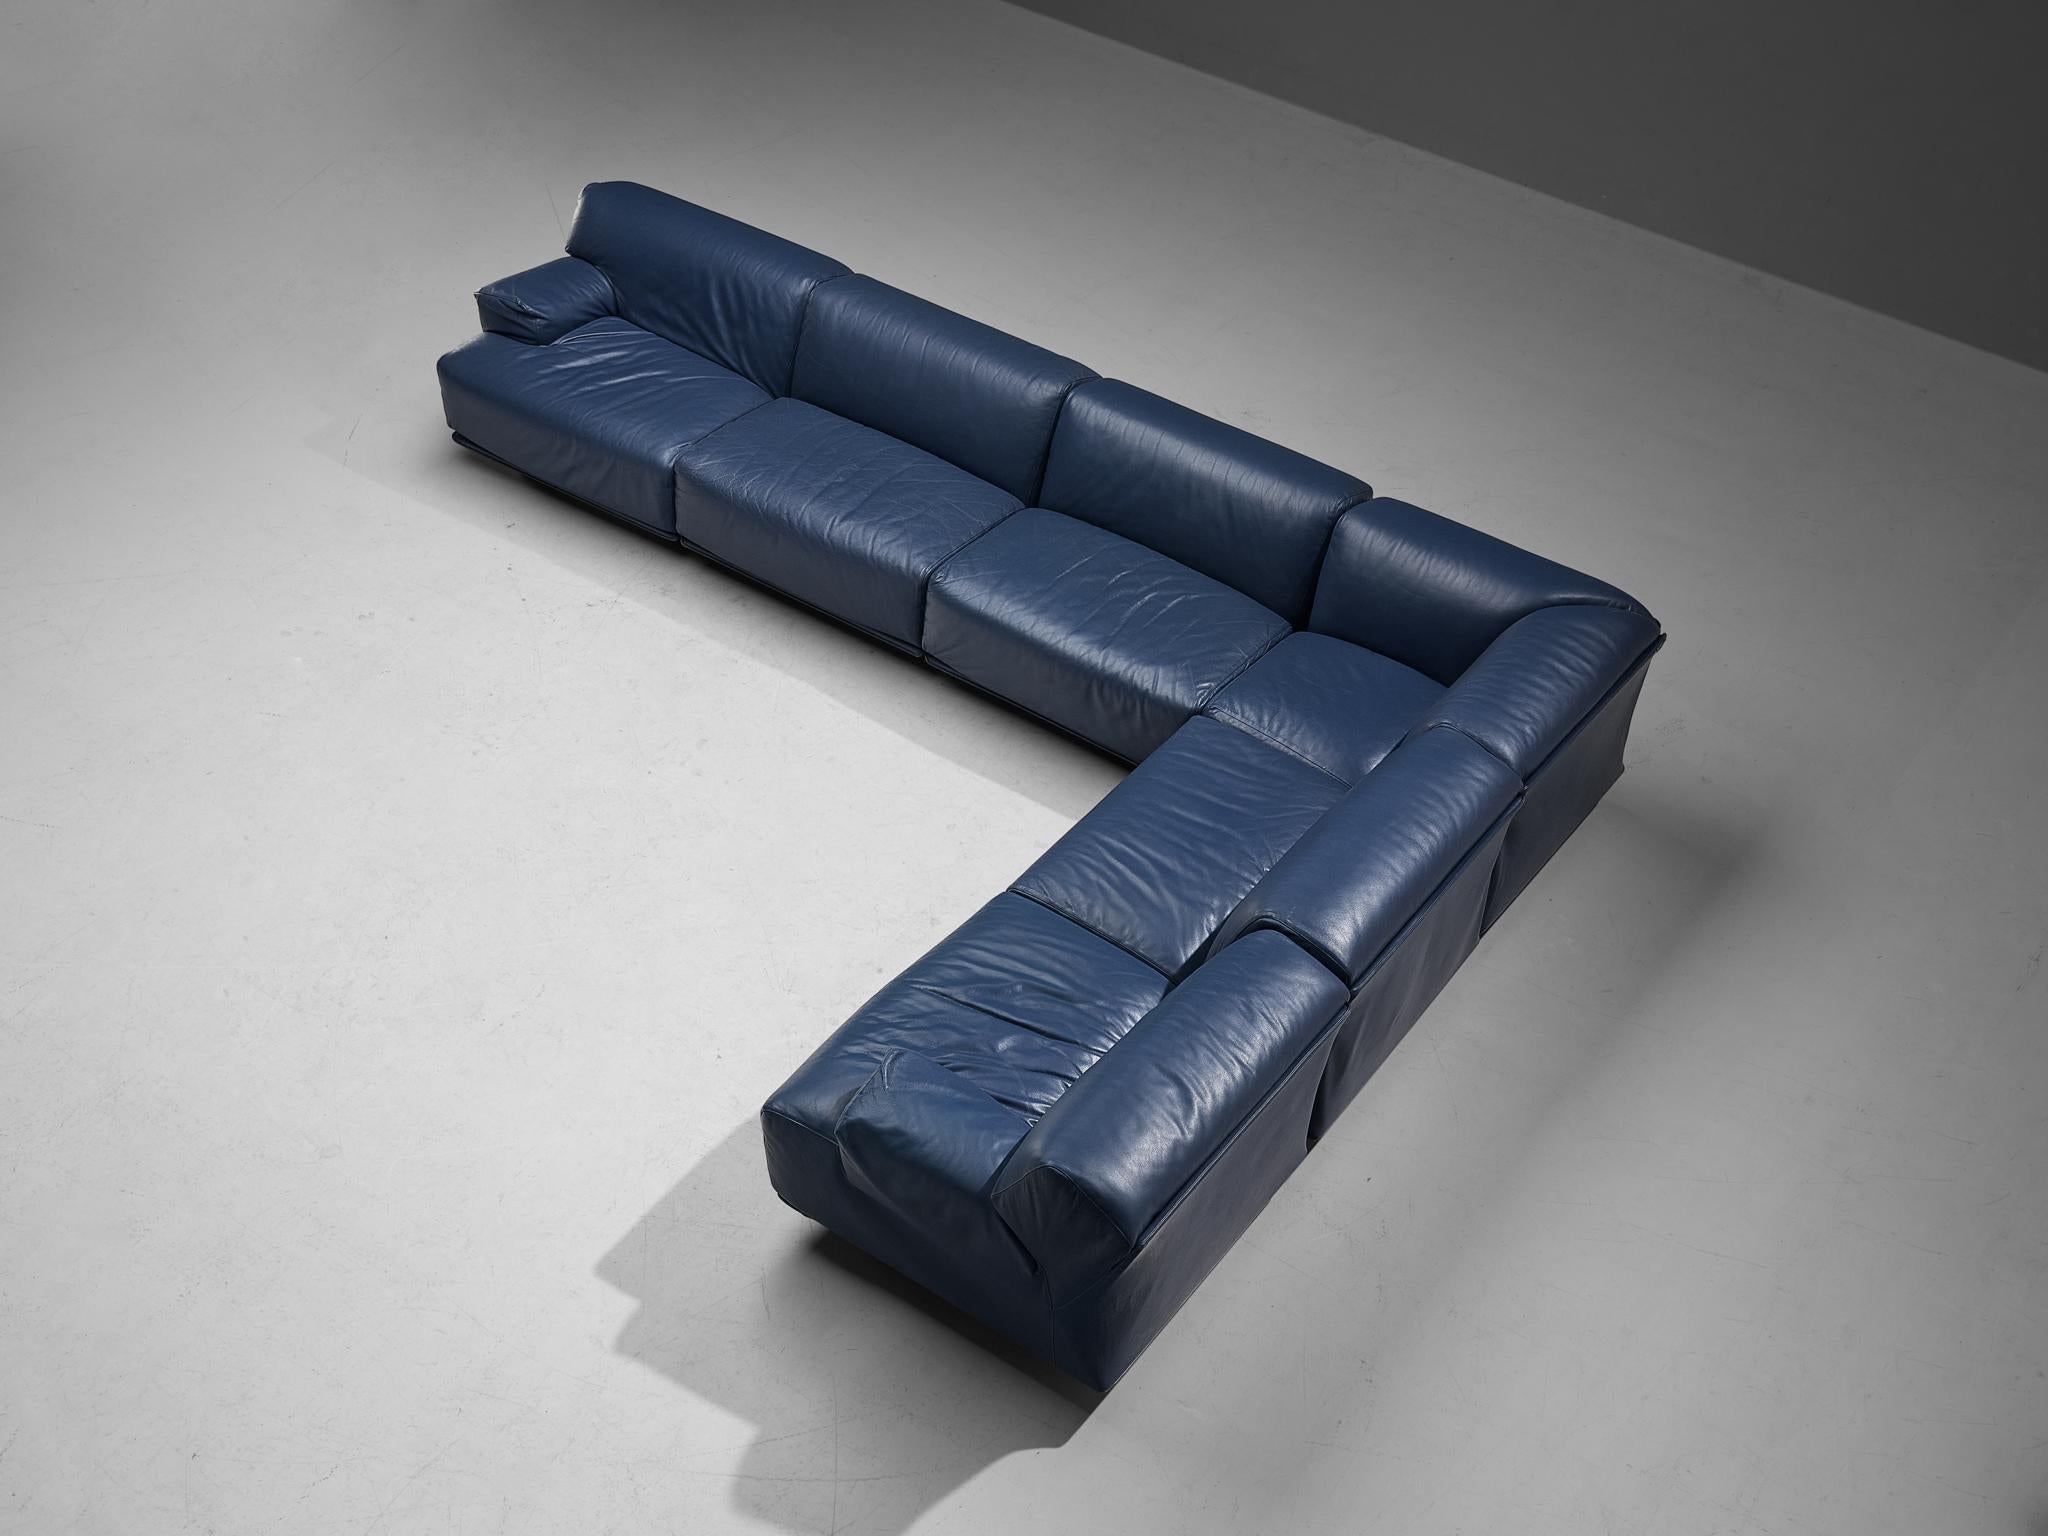 Vico Magistretti for Cassina, ‘Fiandra’ sectional sofa, leather, plastic, Italy, 1970s 

This subtle and modest sofa is designed by the Italian designer Vico Magistretti (1920-2006) for Cassina and contains one corner element, two elements with